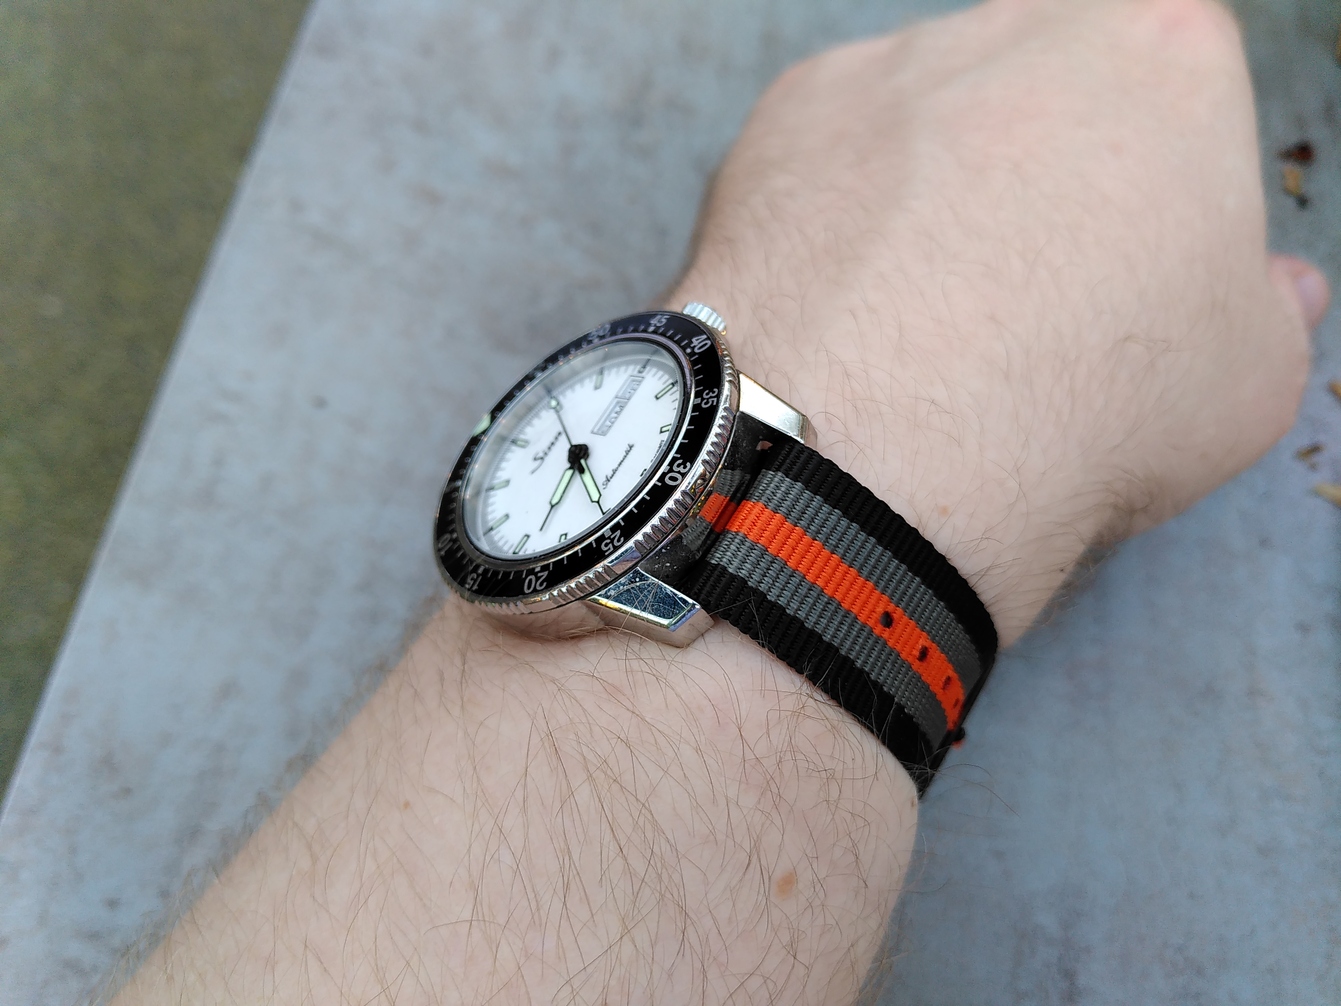 … and on a more colorful NATO strap